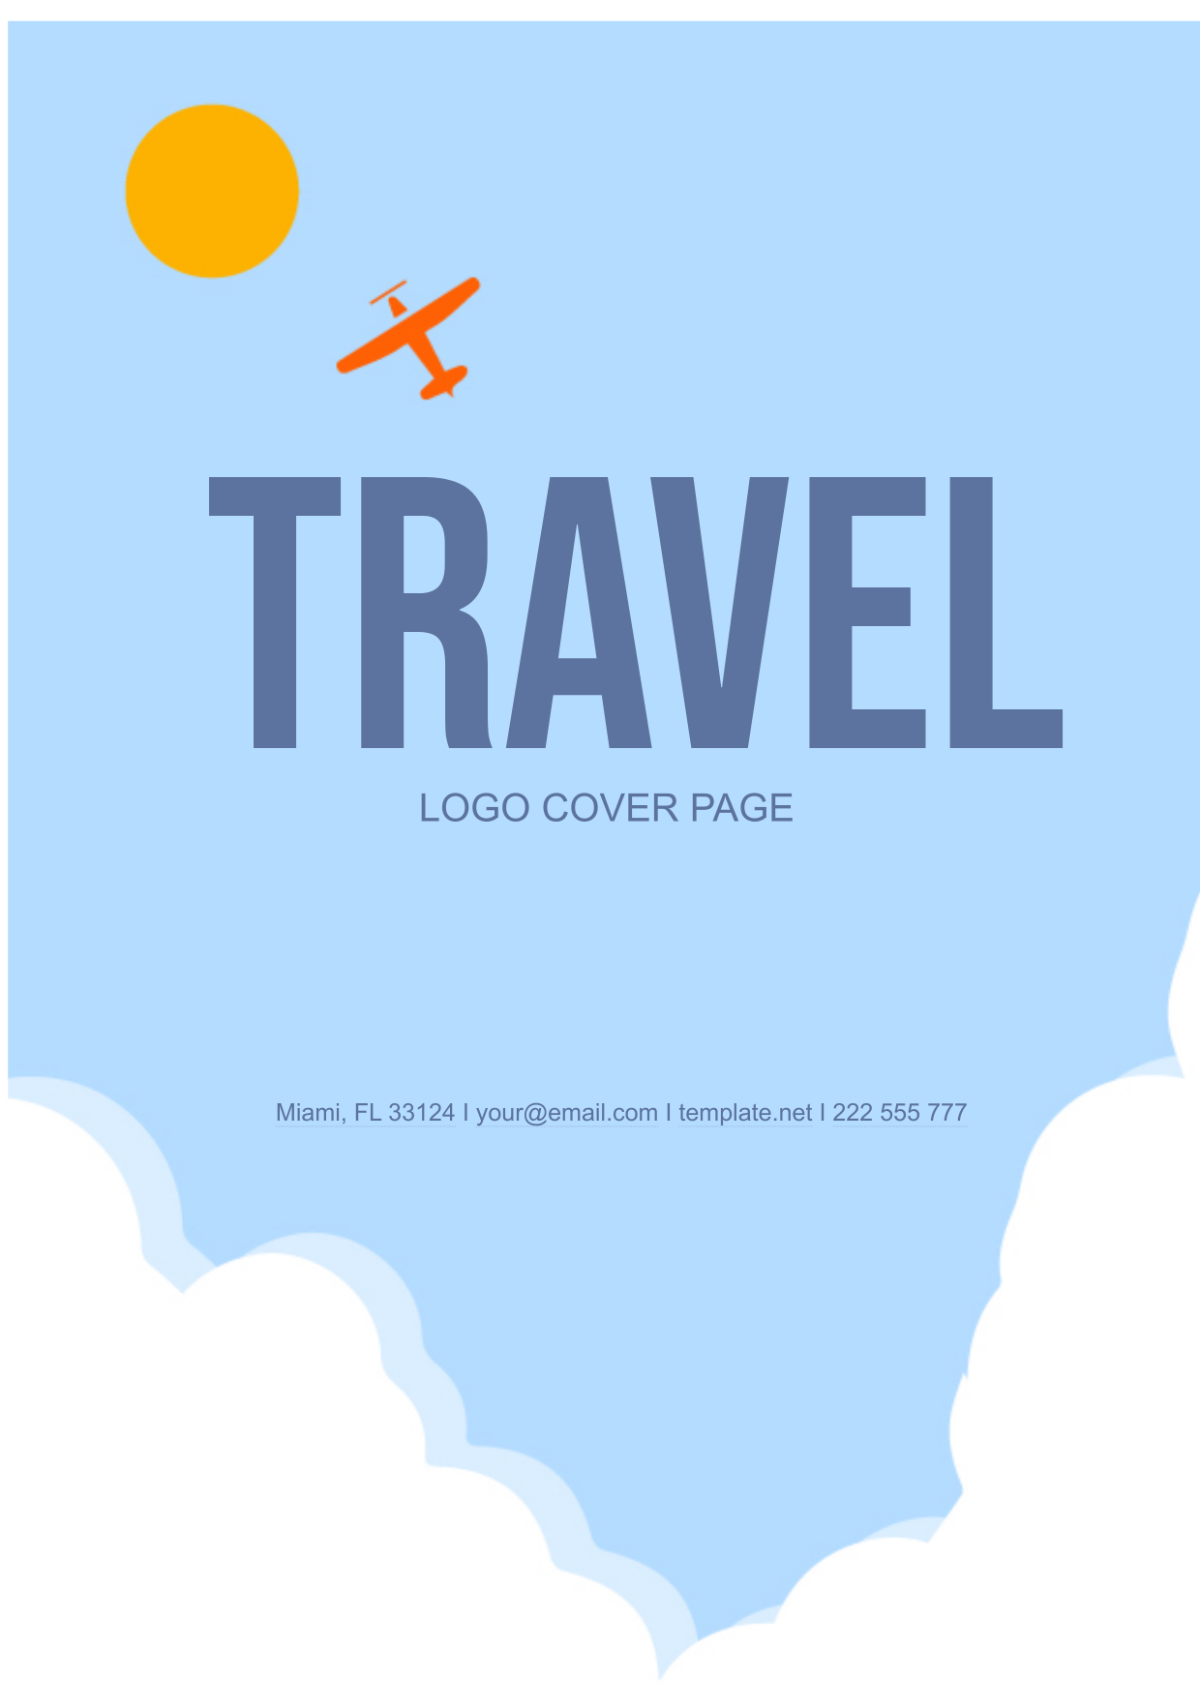 Travel Logo Cover Page Template